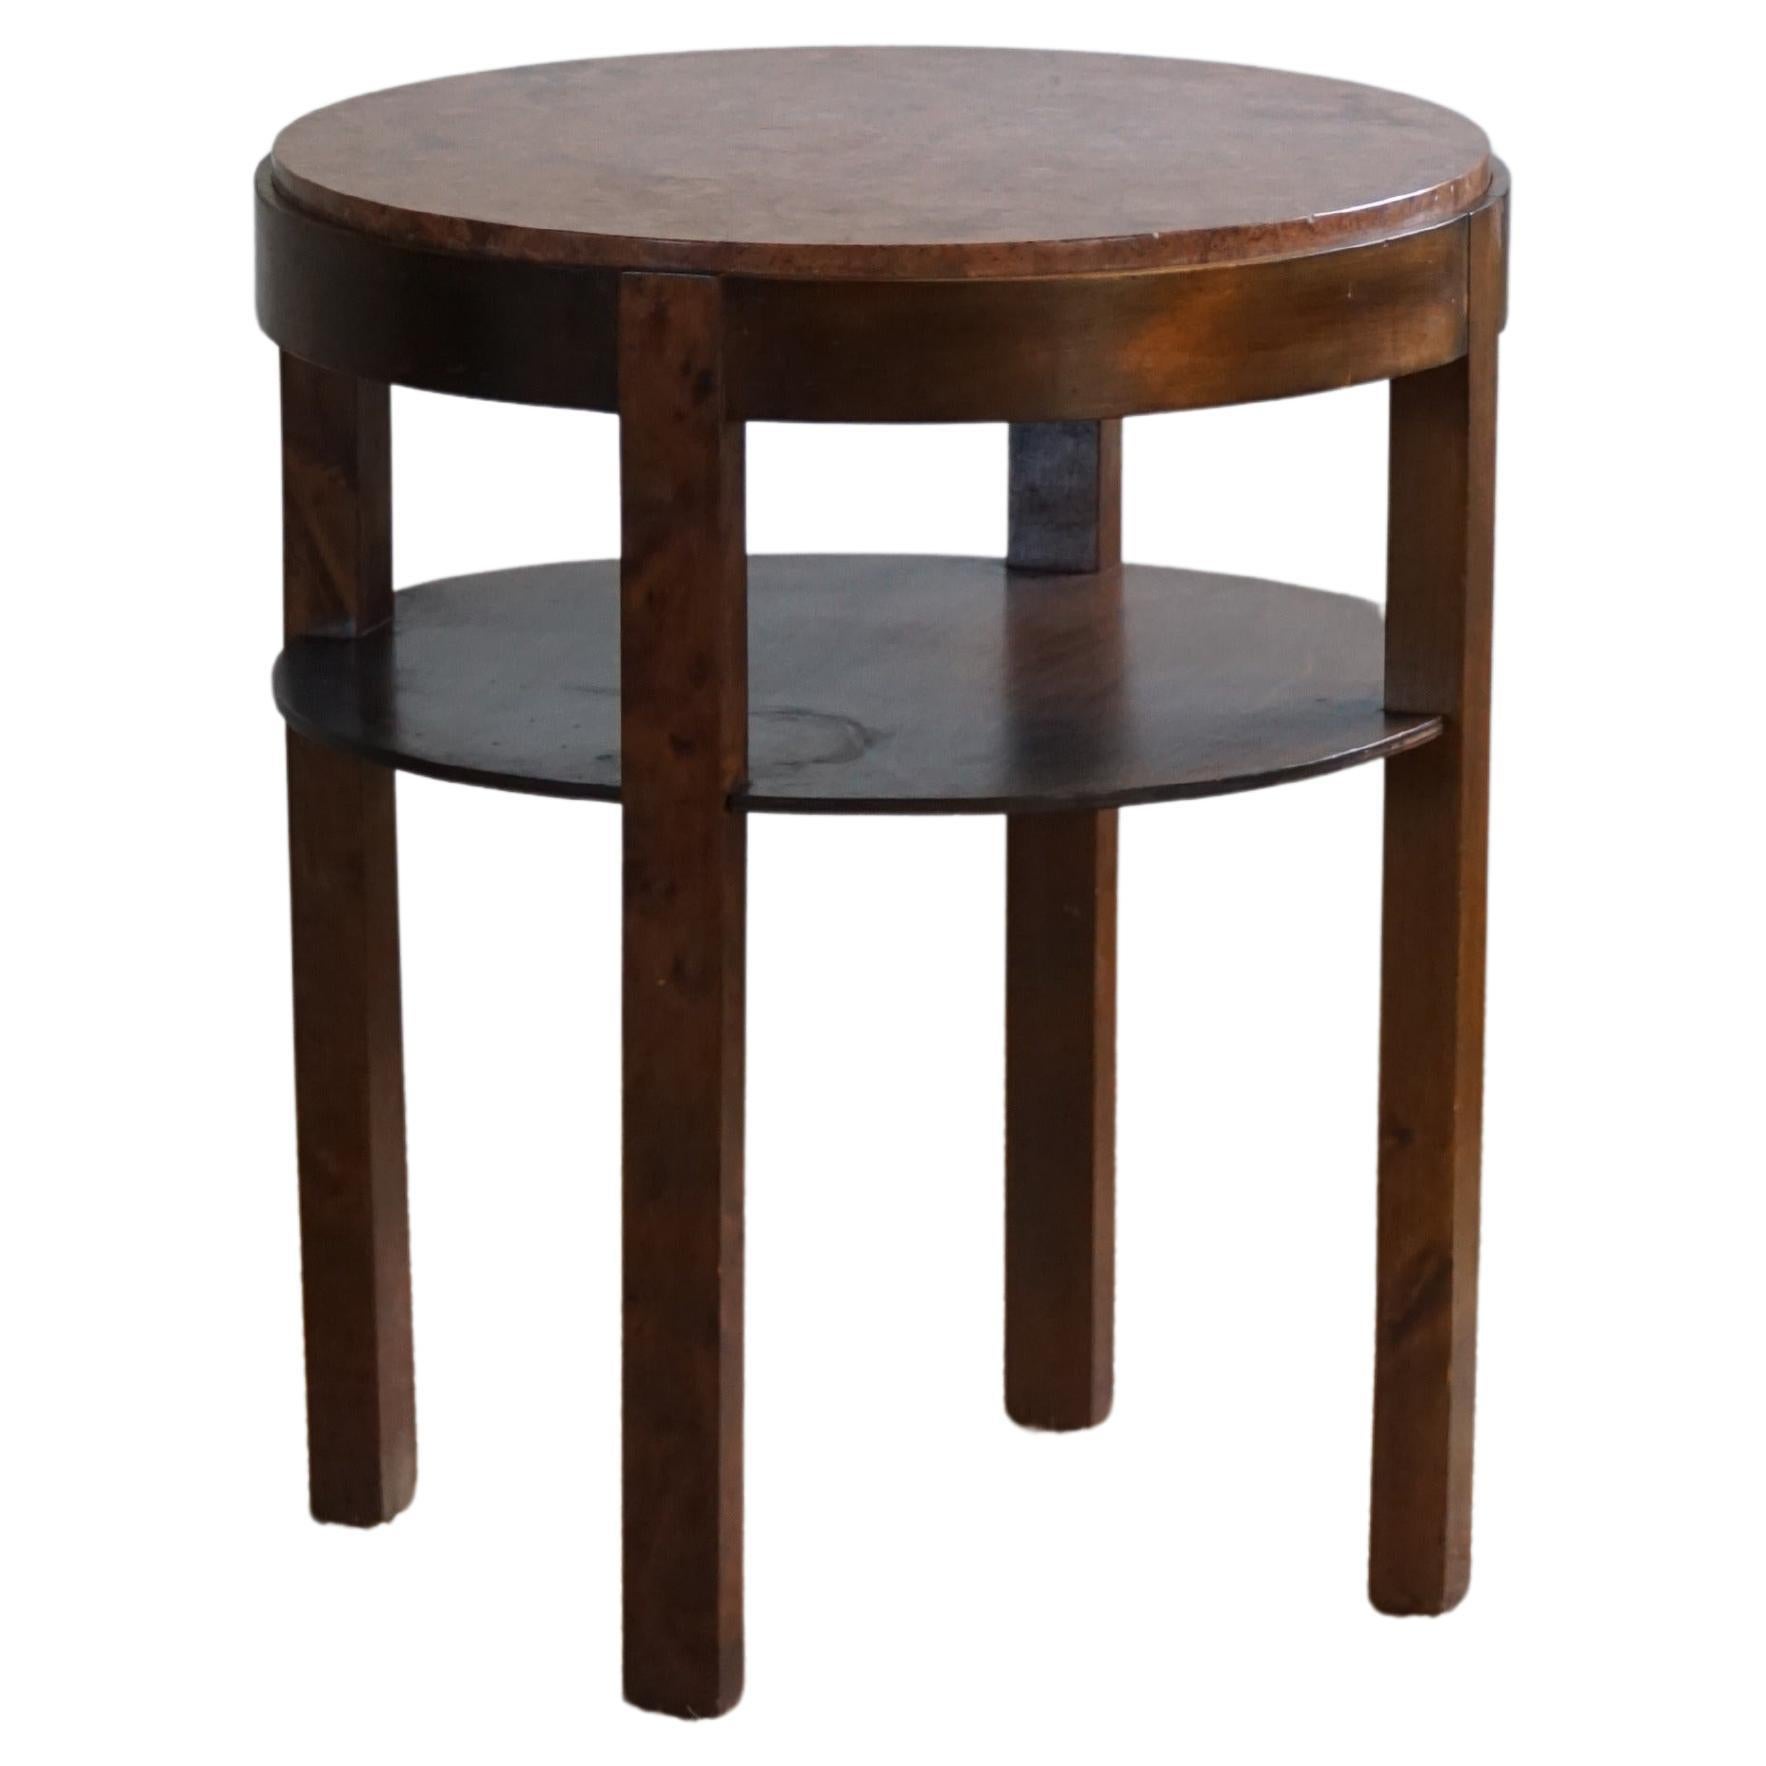 Round Art Deco Side Table in Beech & Marble Top, By a Danish Cabinetmaker, 1940s For Sale